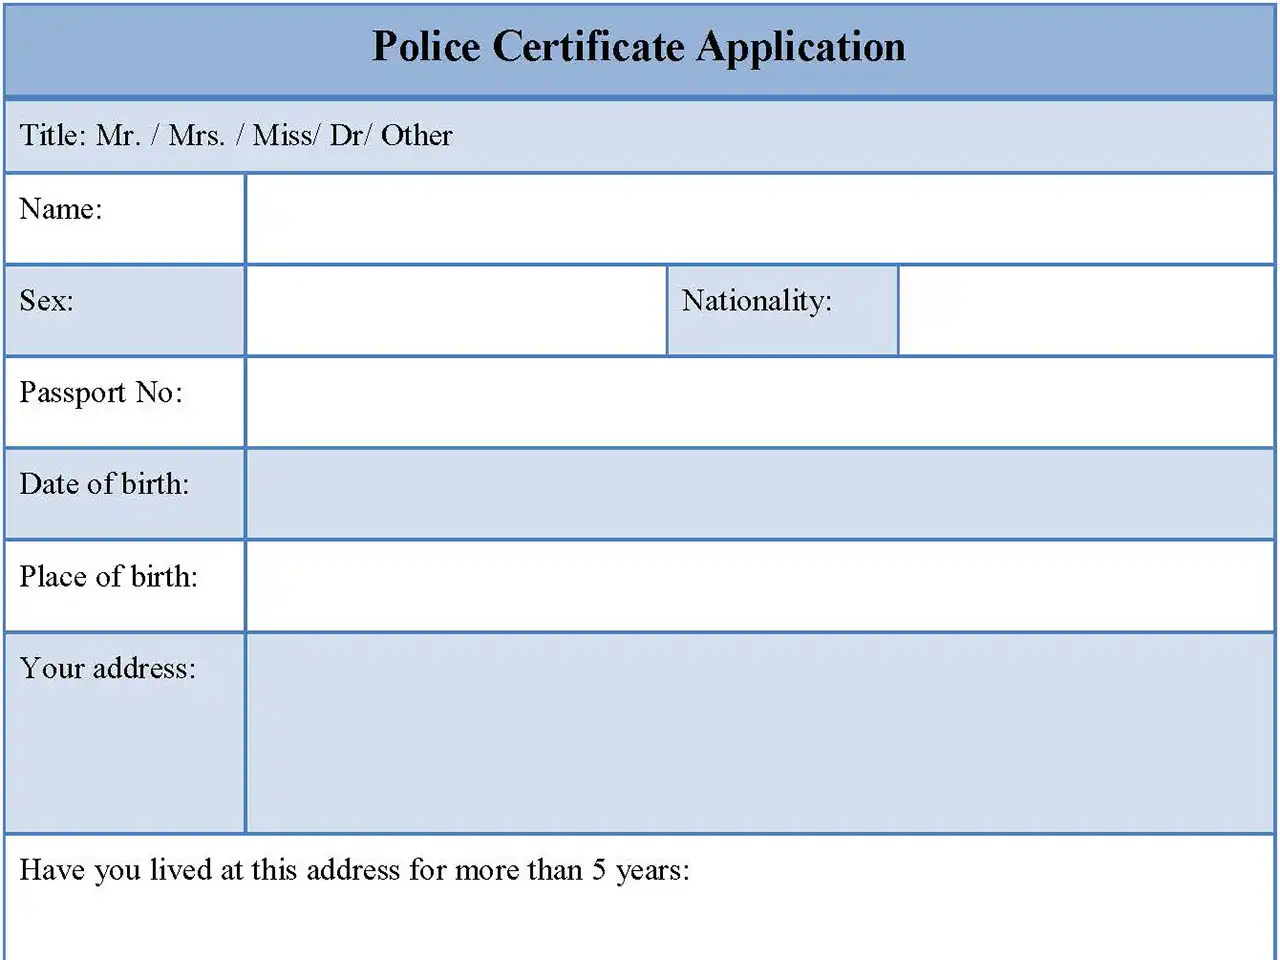 Police Certificate Application Form